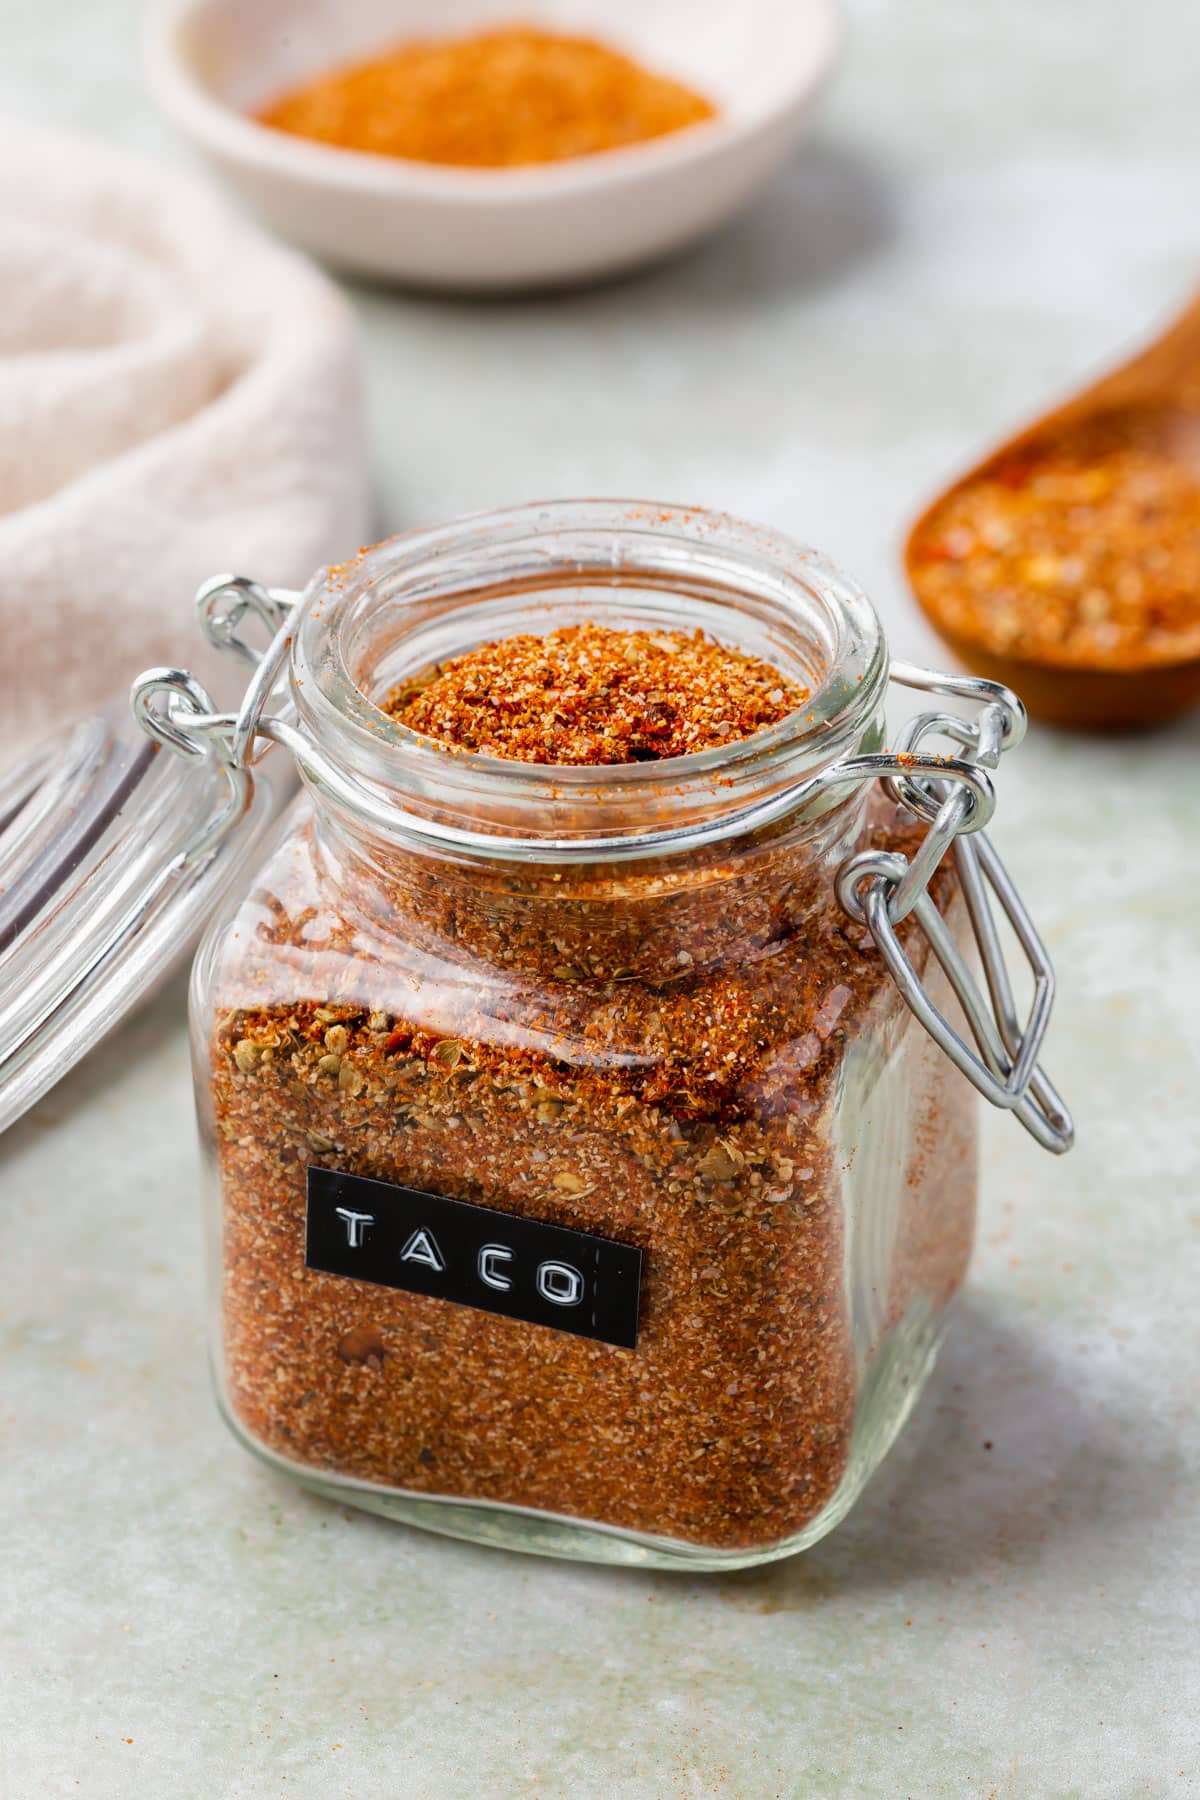 Gluten-free taco seasoning in a glass jar with a black and white label that says "taco" on it with spoons and bowls of jars in the background.